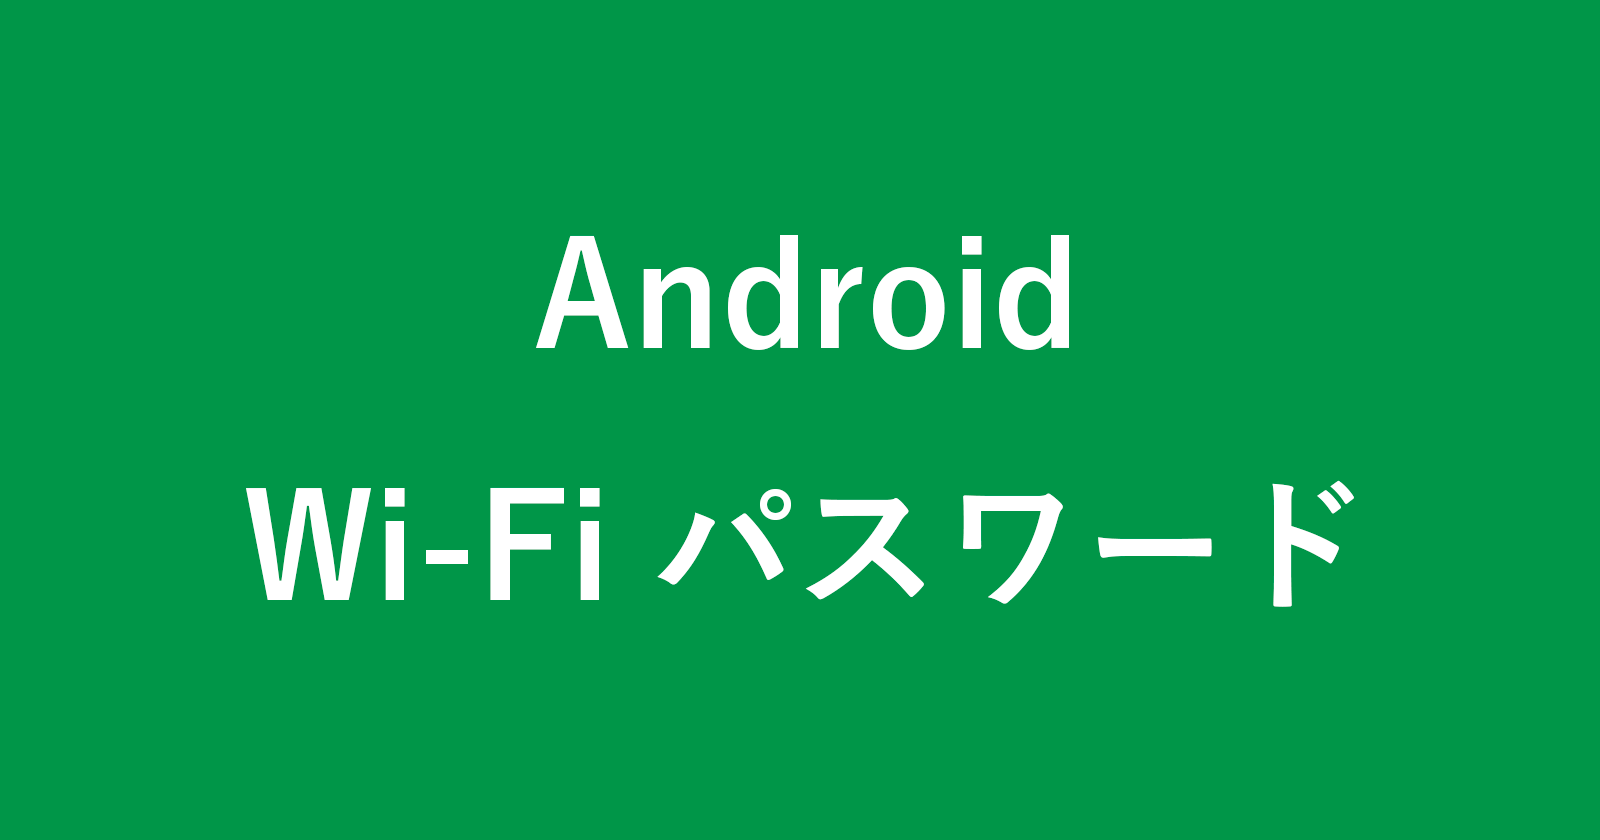 android wi fi password